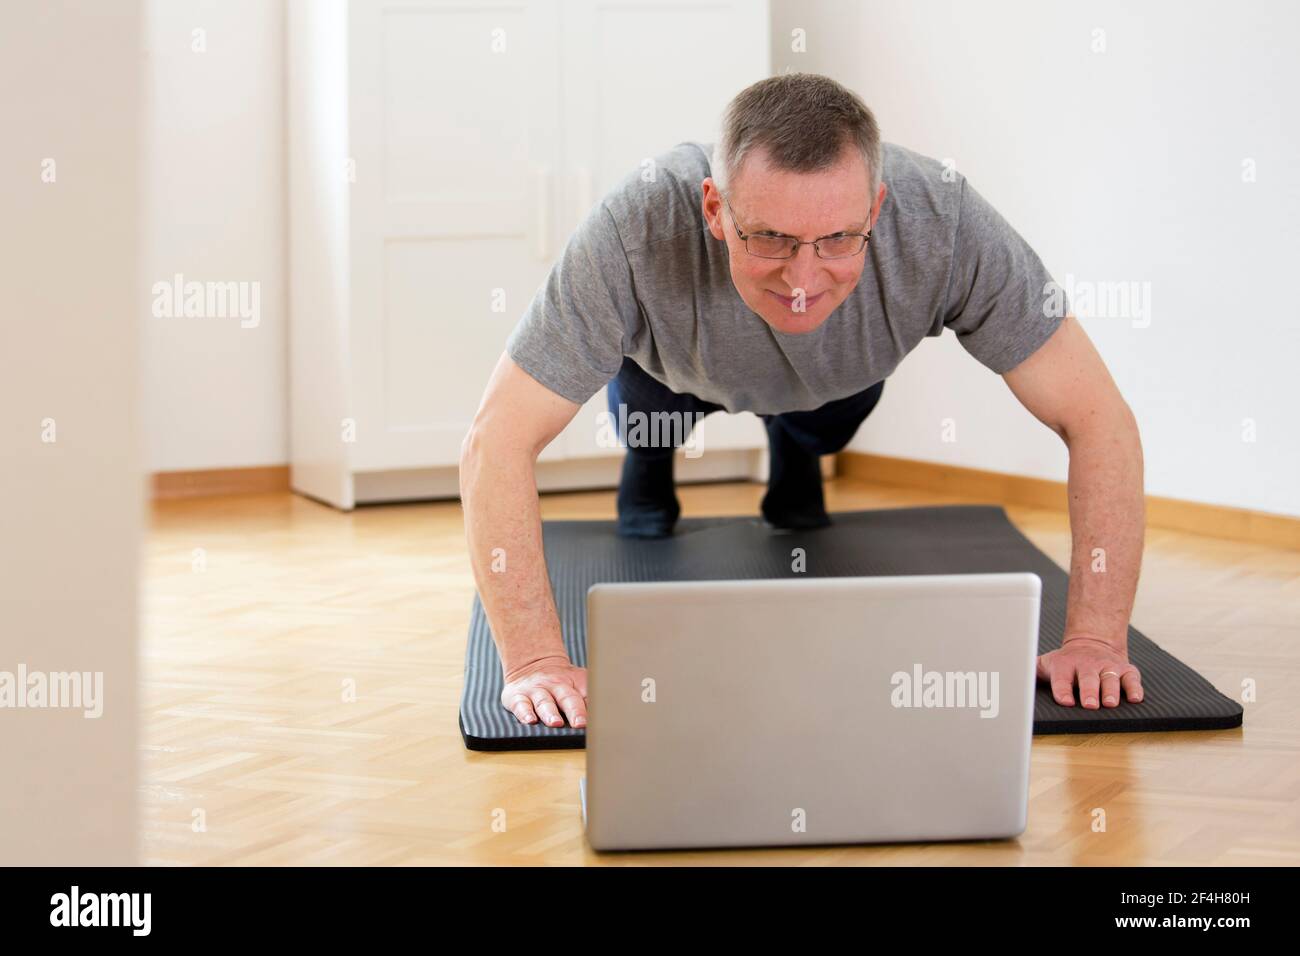 Mature or senior man doing push ups at home in front of laptop - focus on the face Stock Photo